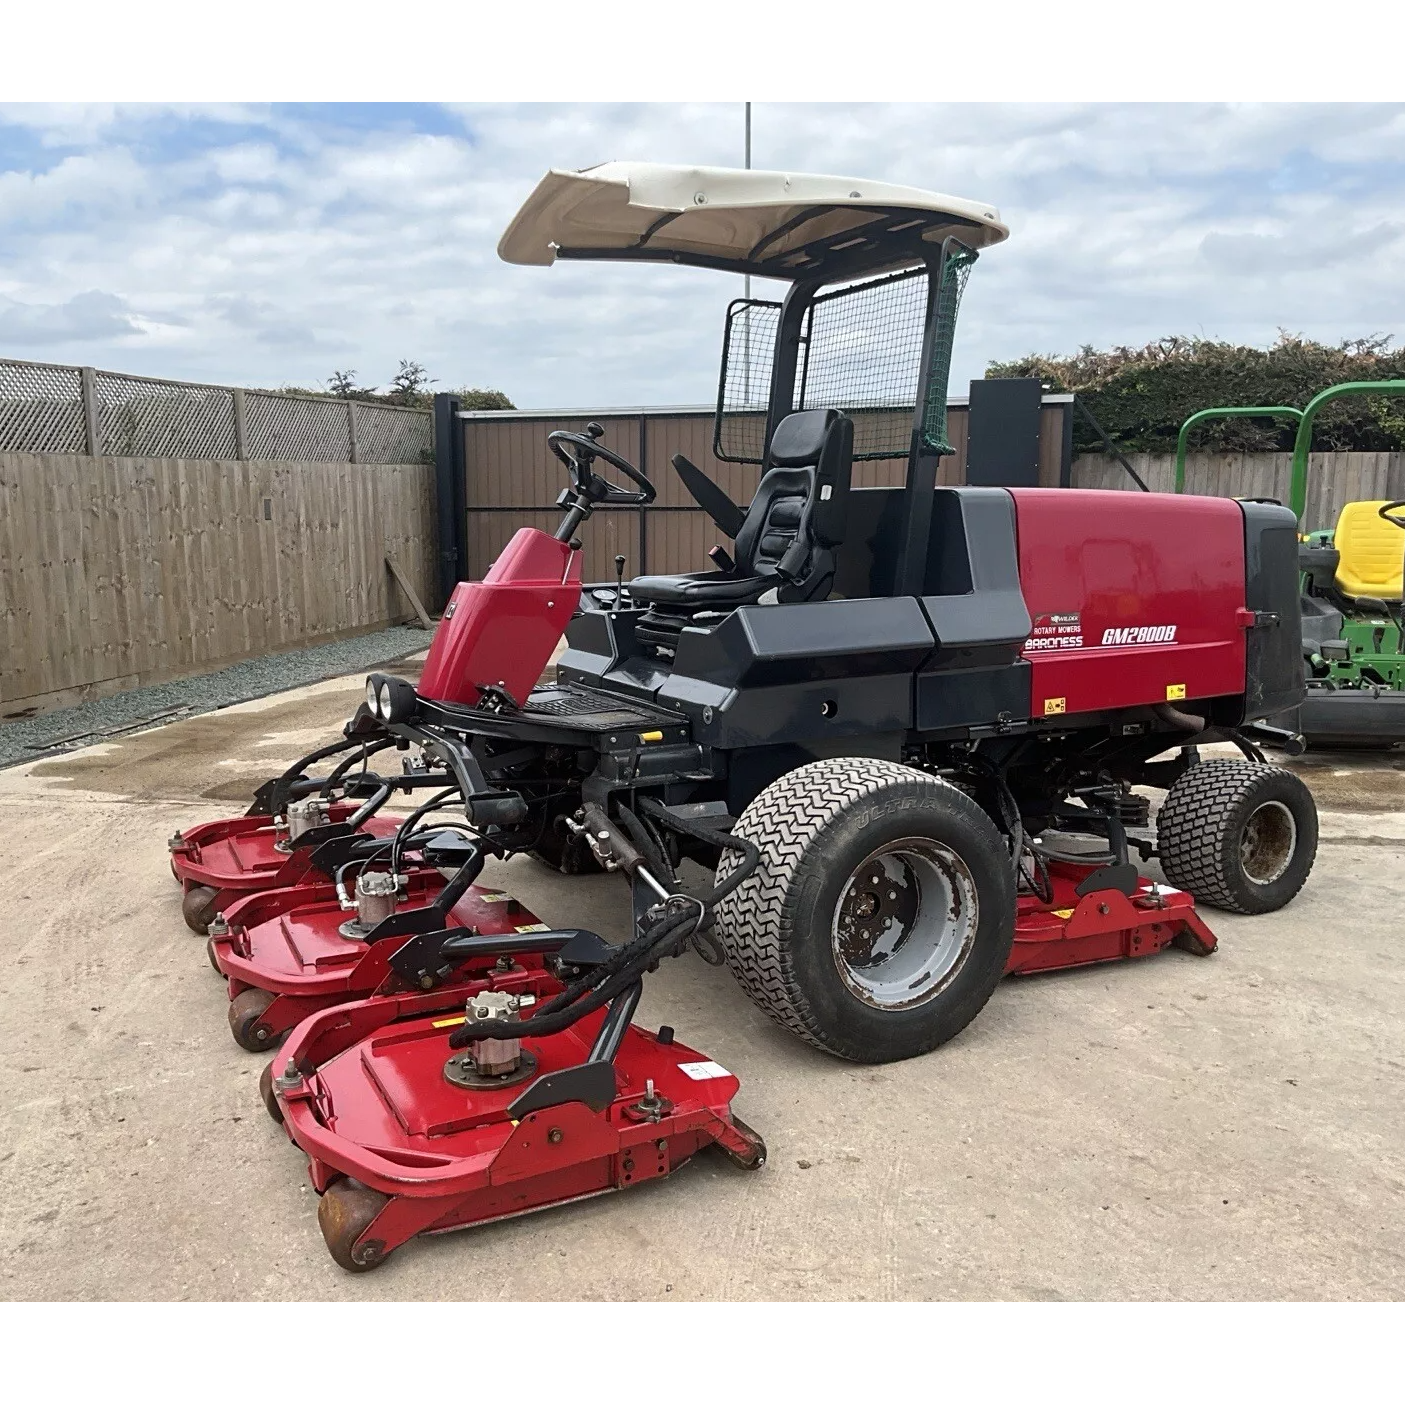 2012 BARONESS GM2800B 5 GANG POD WIDE AREA RIDE ON LAWN MOWER